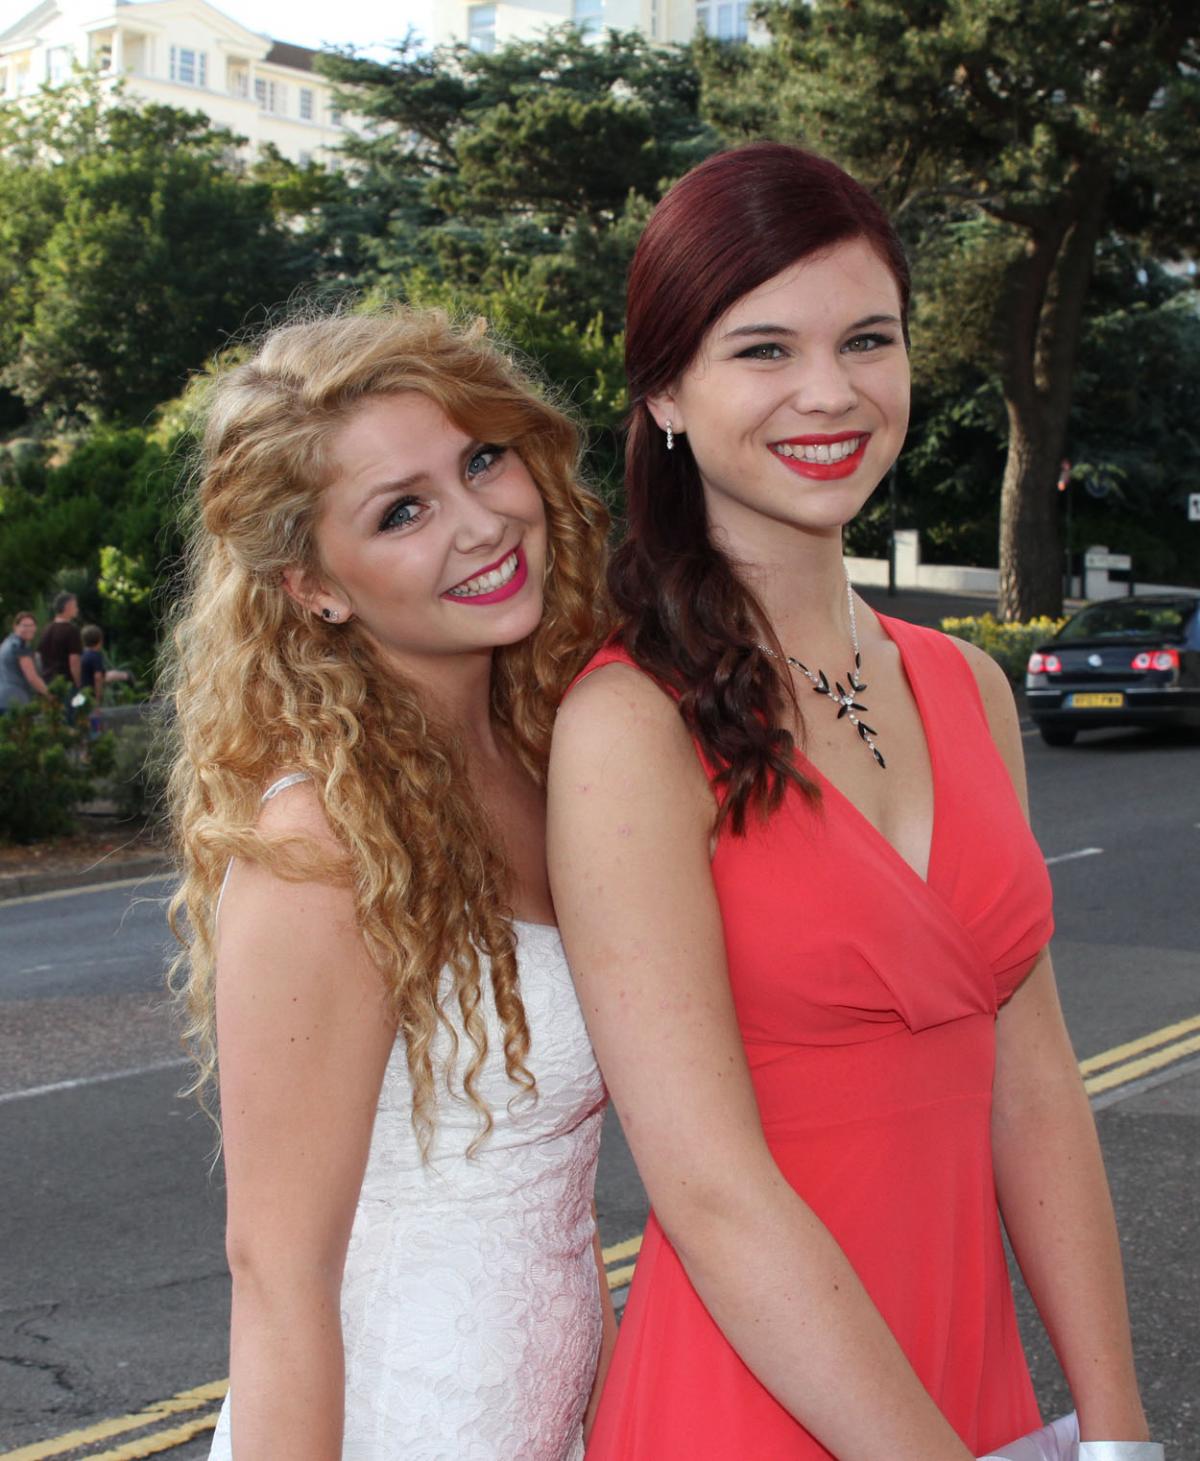 Bournemouth School for Girls Leavers Ball at the Royal Bath Hotel on 25th June 2015. Pictures by Hattie Miles. 